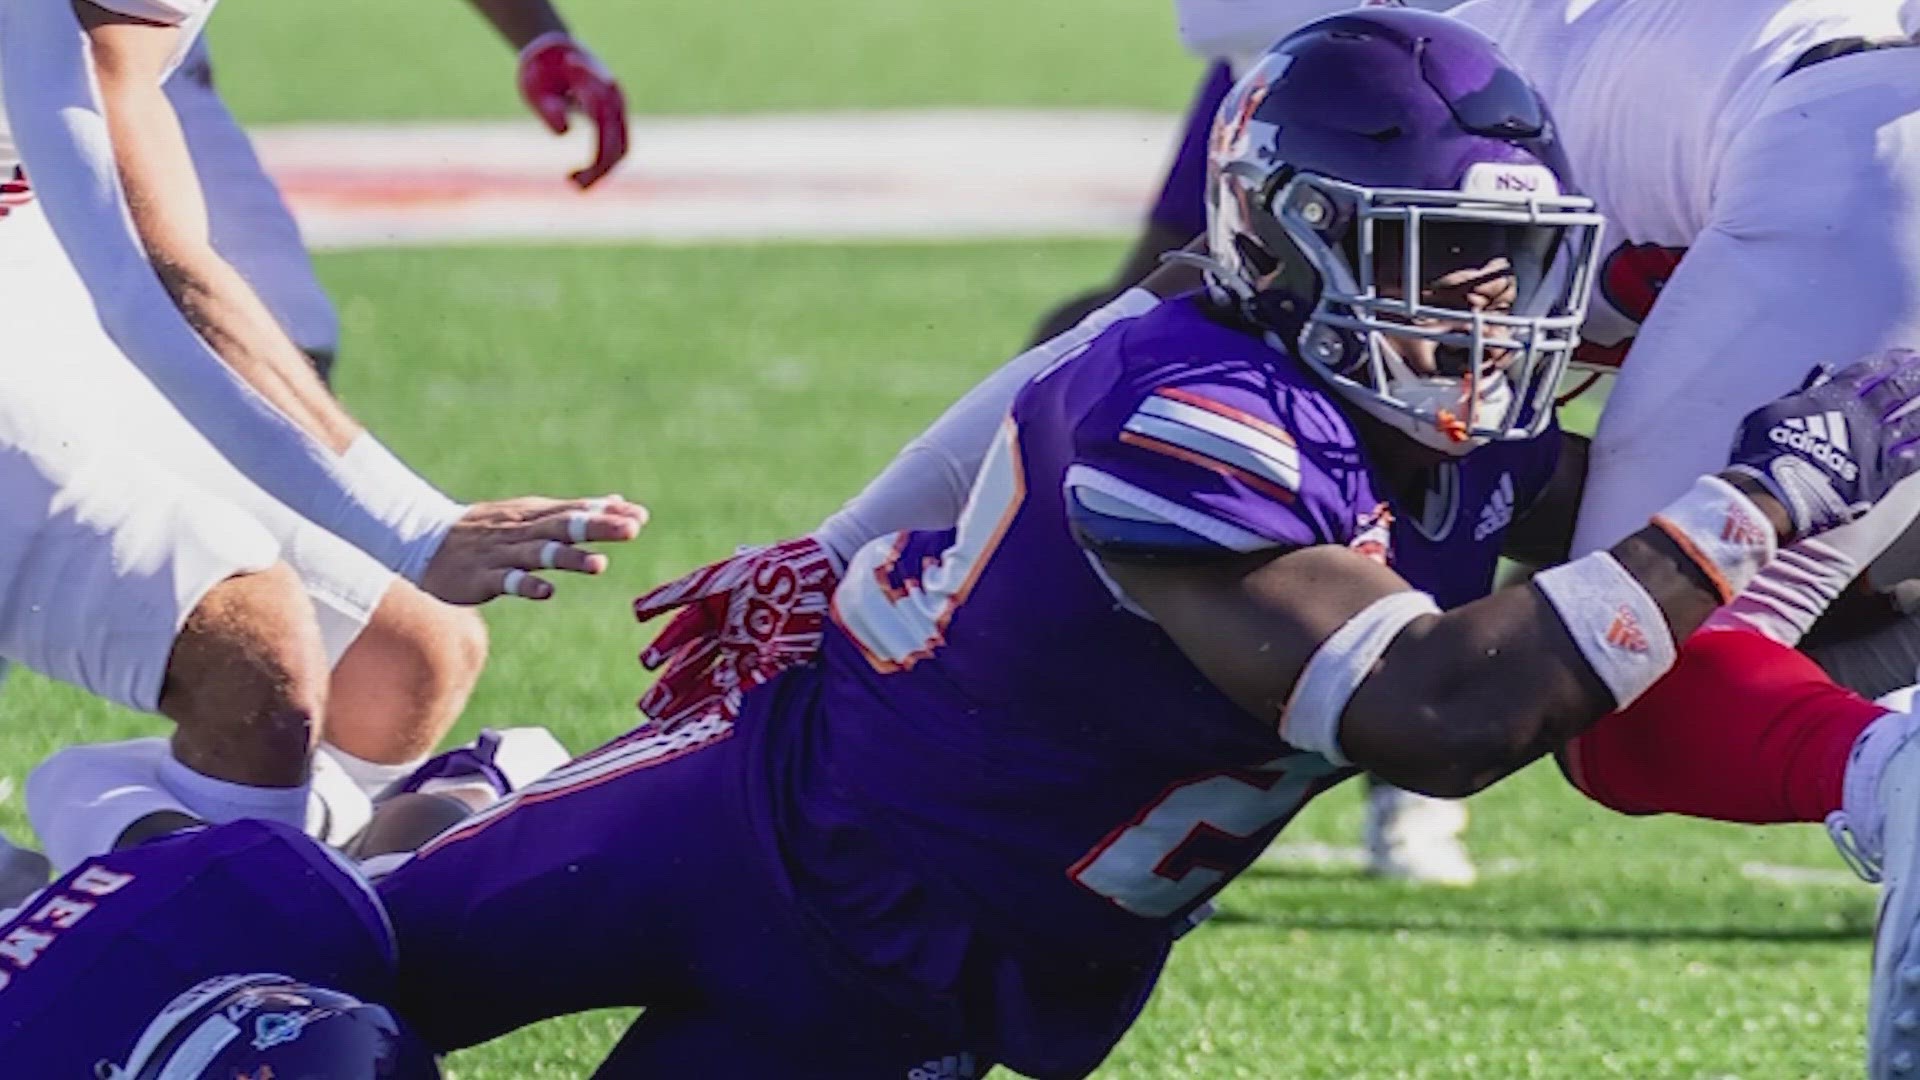 The death of the football player from Texas is under investigation, but his parents say Northwestern State’s football coach could’ve taken action to protect him.